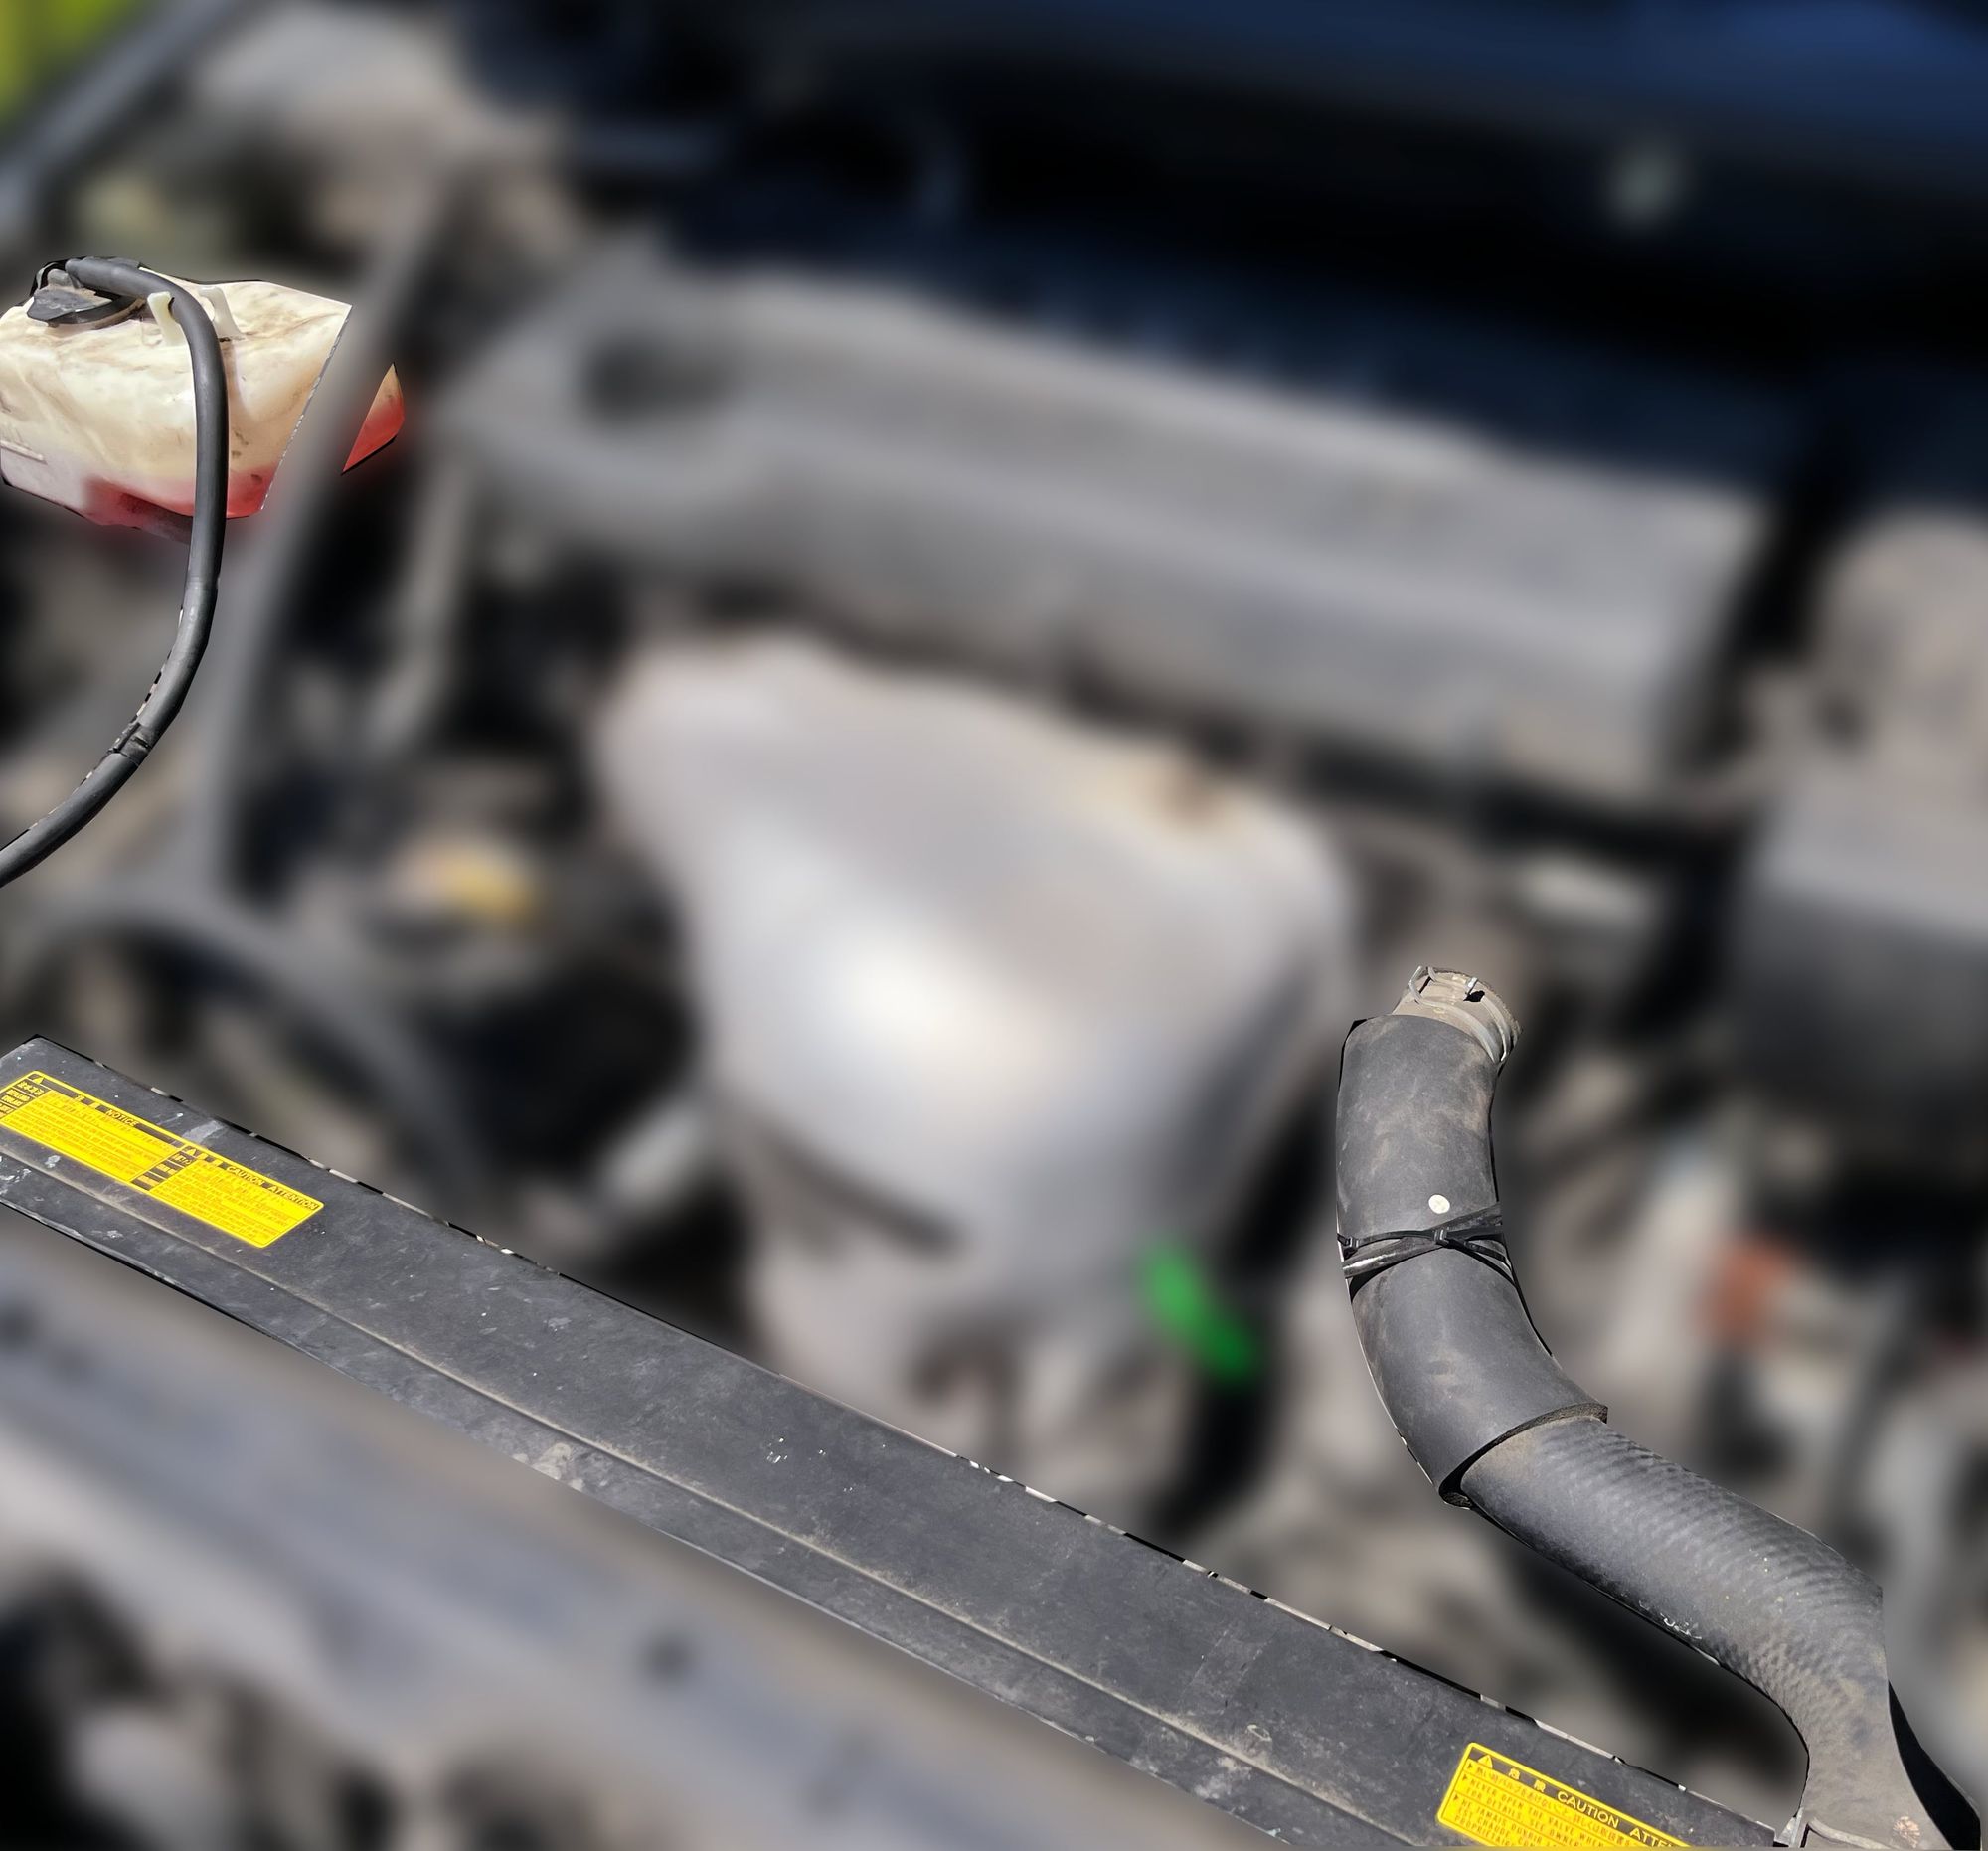 An engine compartment with the coolant system in focus and the rest of the engine and components blurred out.